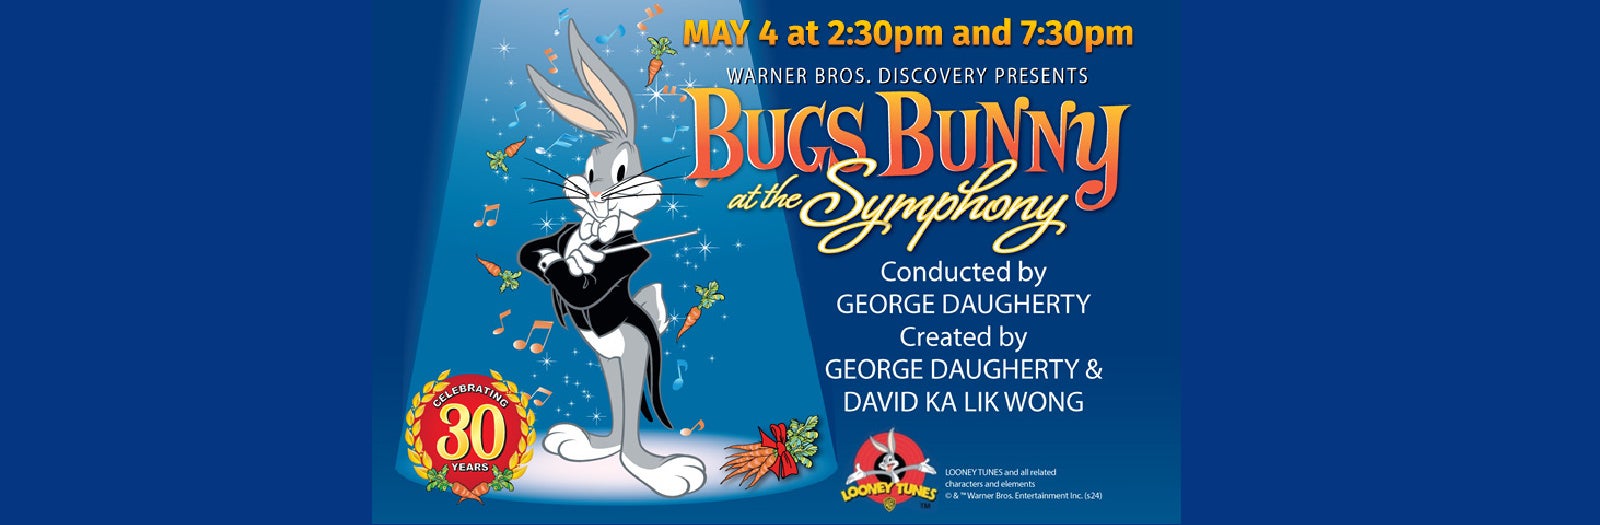 BUGS BUNNY AT THE SYMPHONY